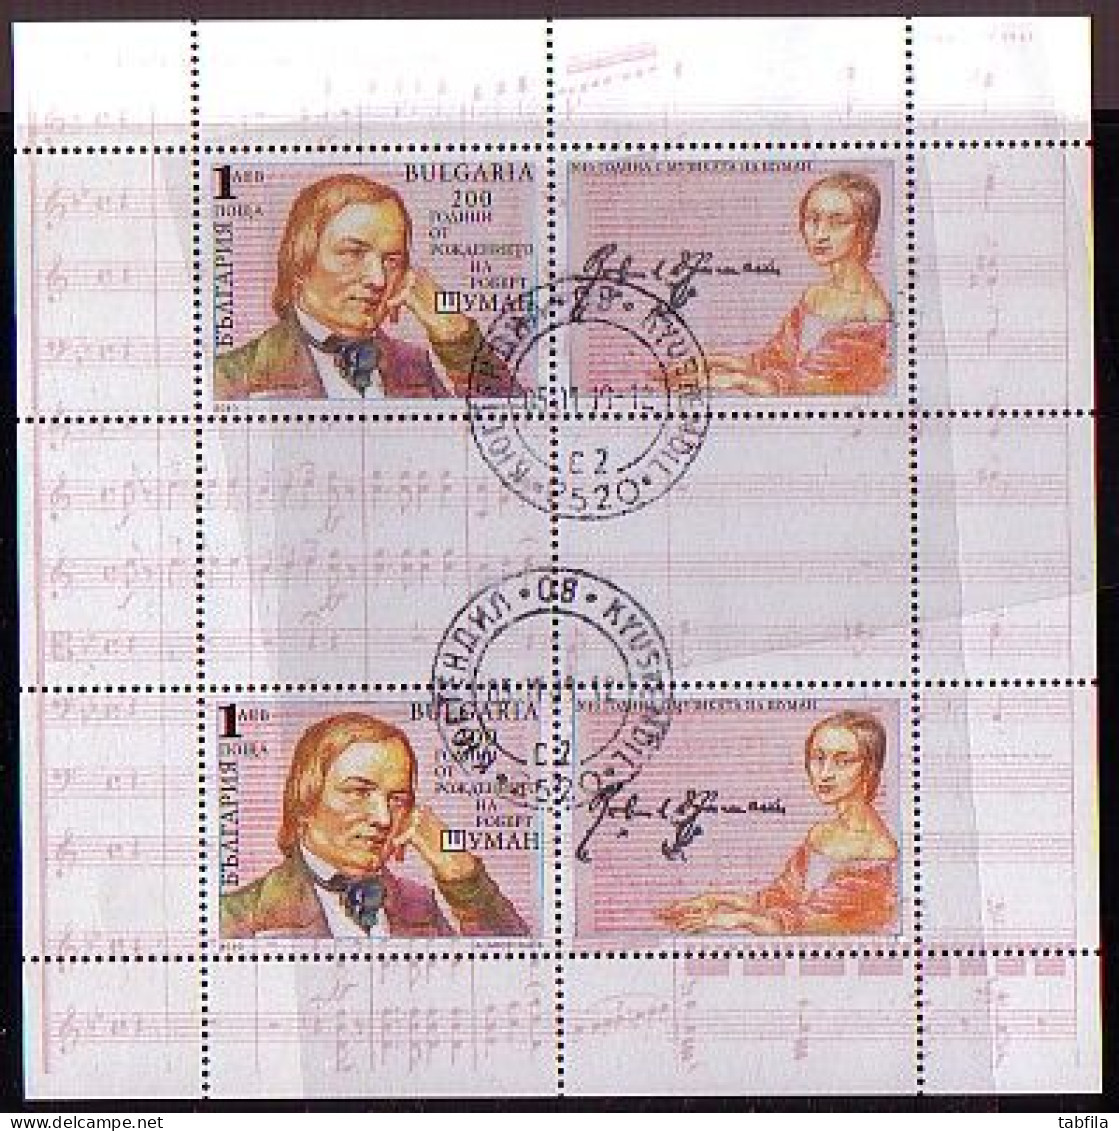 BULGARIA - 2010 - Anniversary Of The Birth Of The Composer Robert Schumann - MS Used - Oblitérés